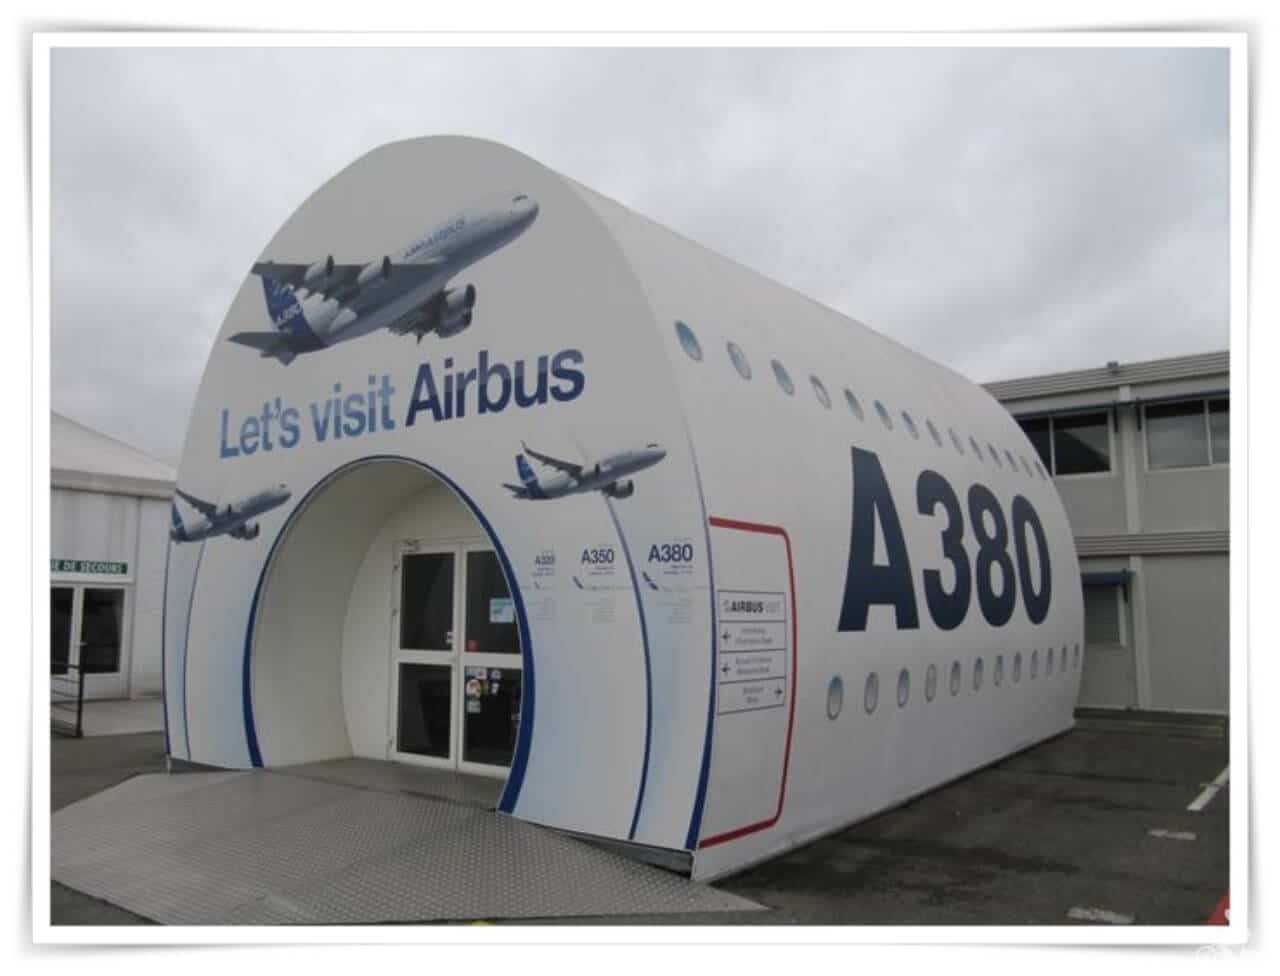 fabrica airbus Toulouse